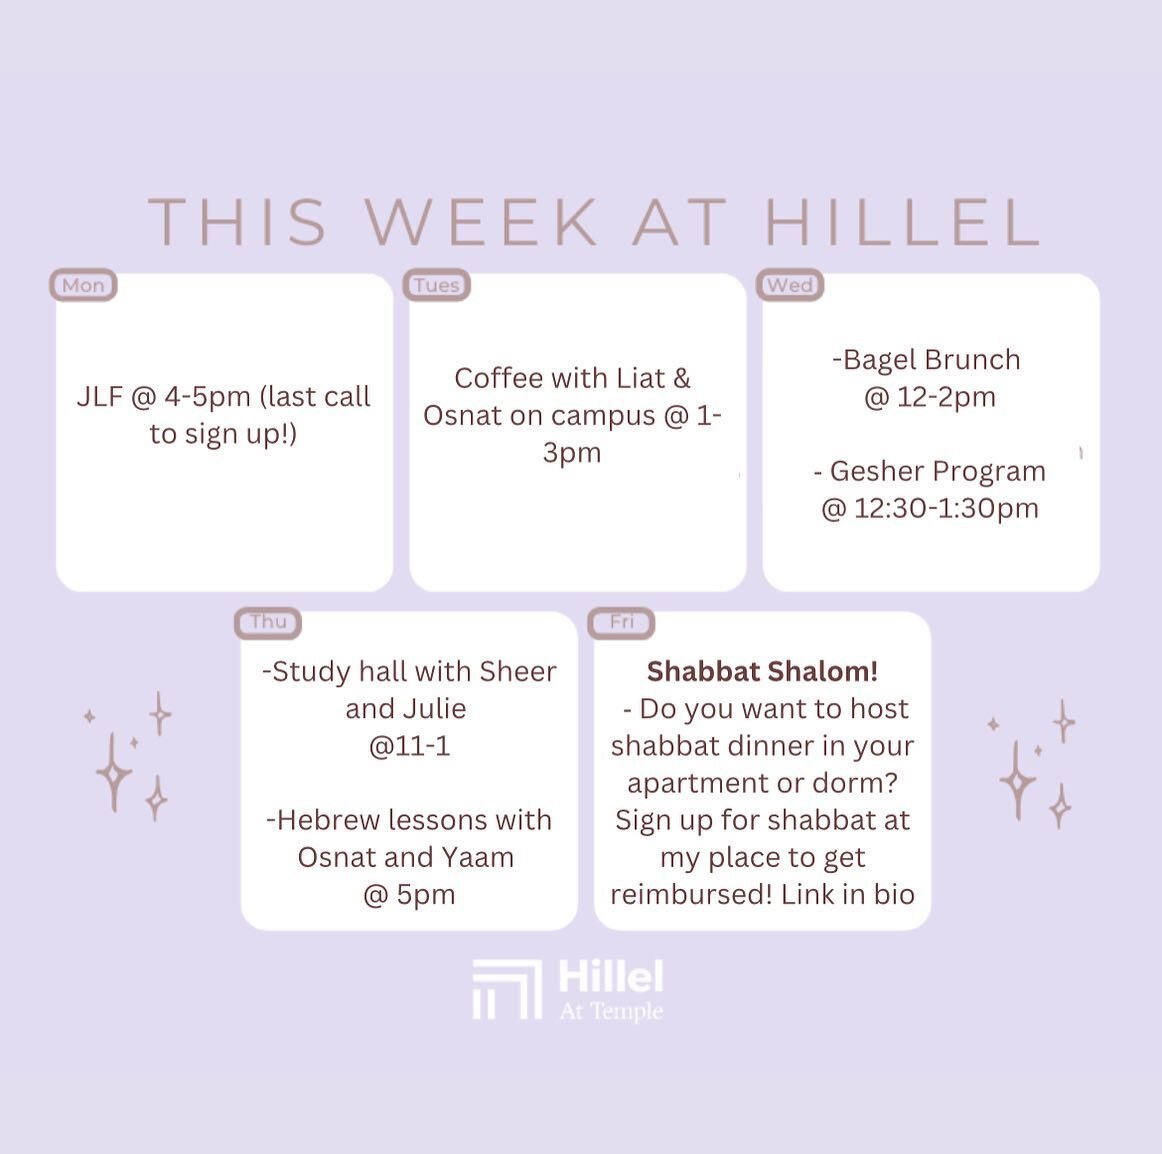 Hope everyone has a great week! See you at Hillel 🤩